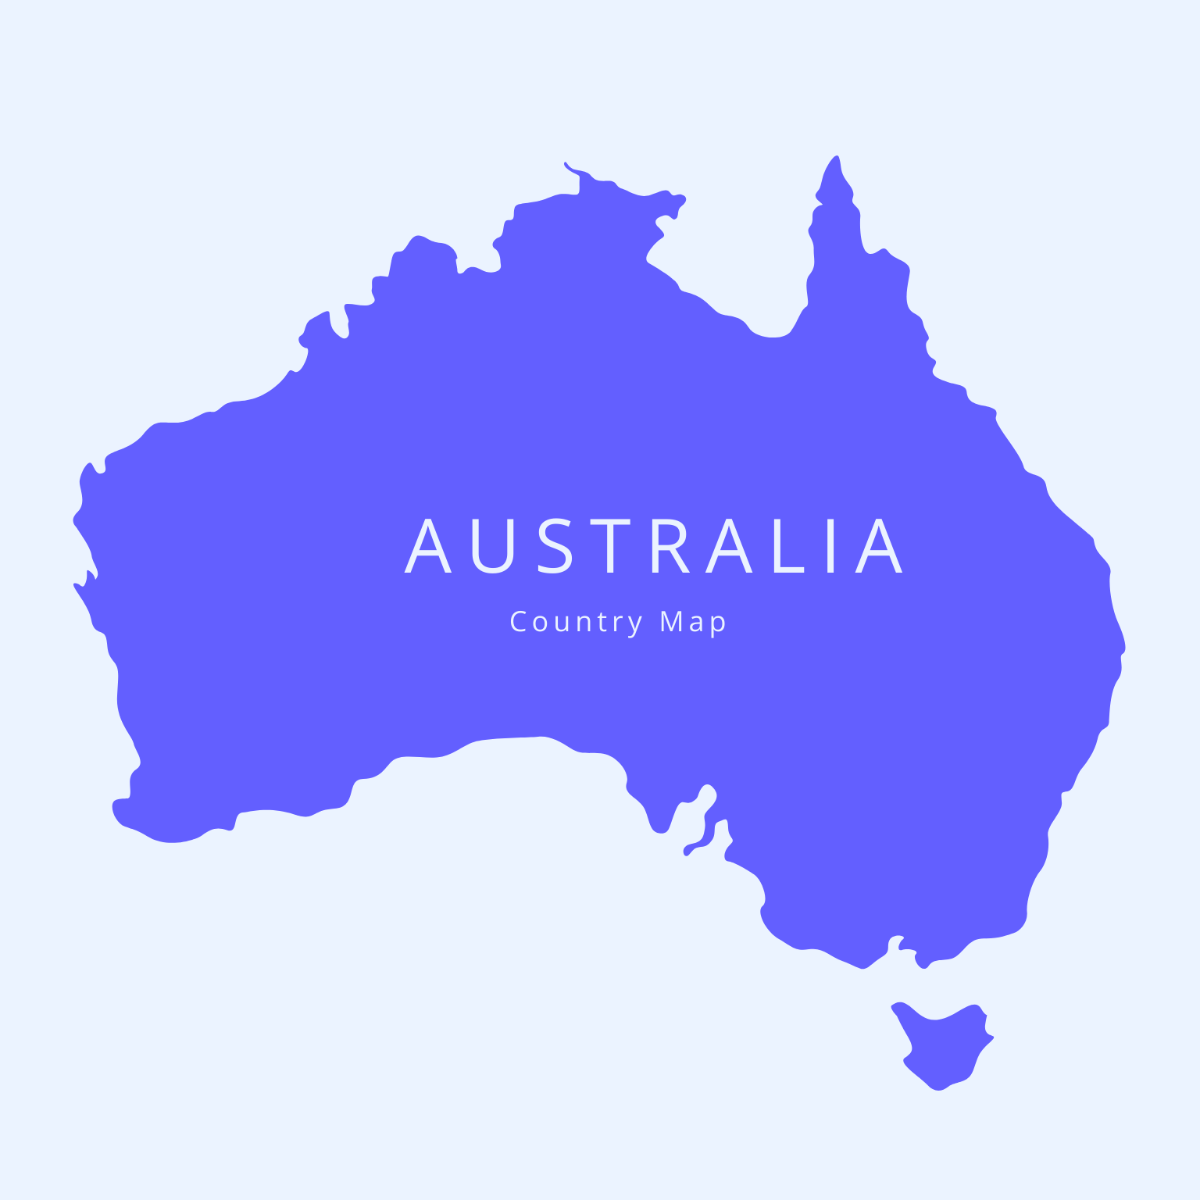 Australia Country Map Vector Template